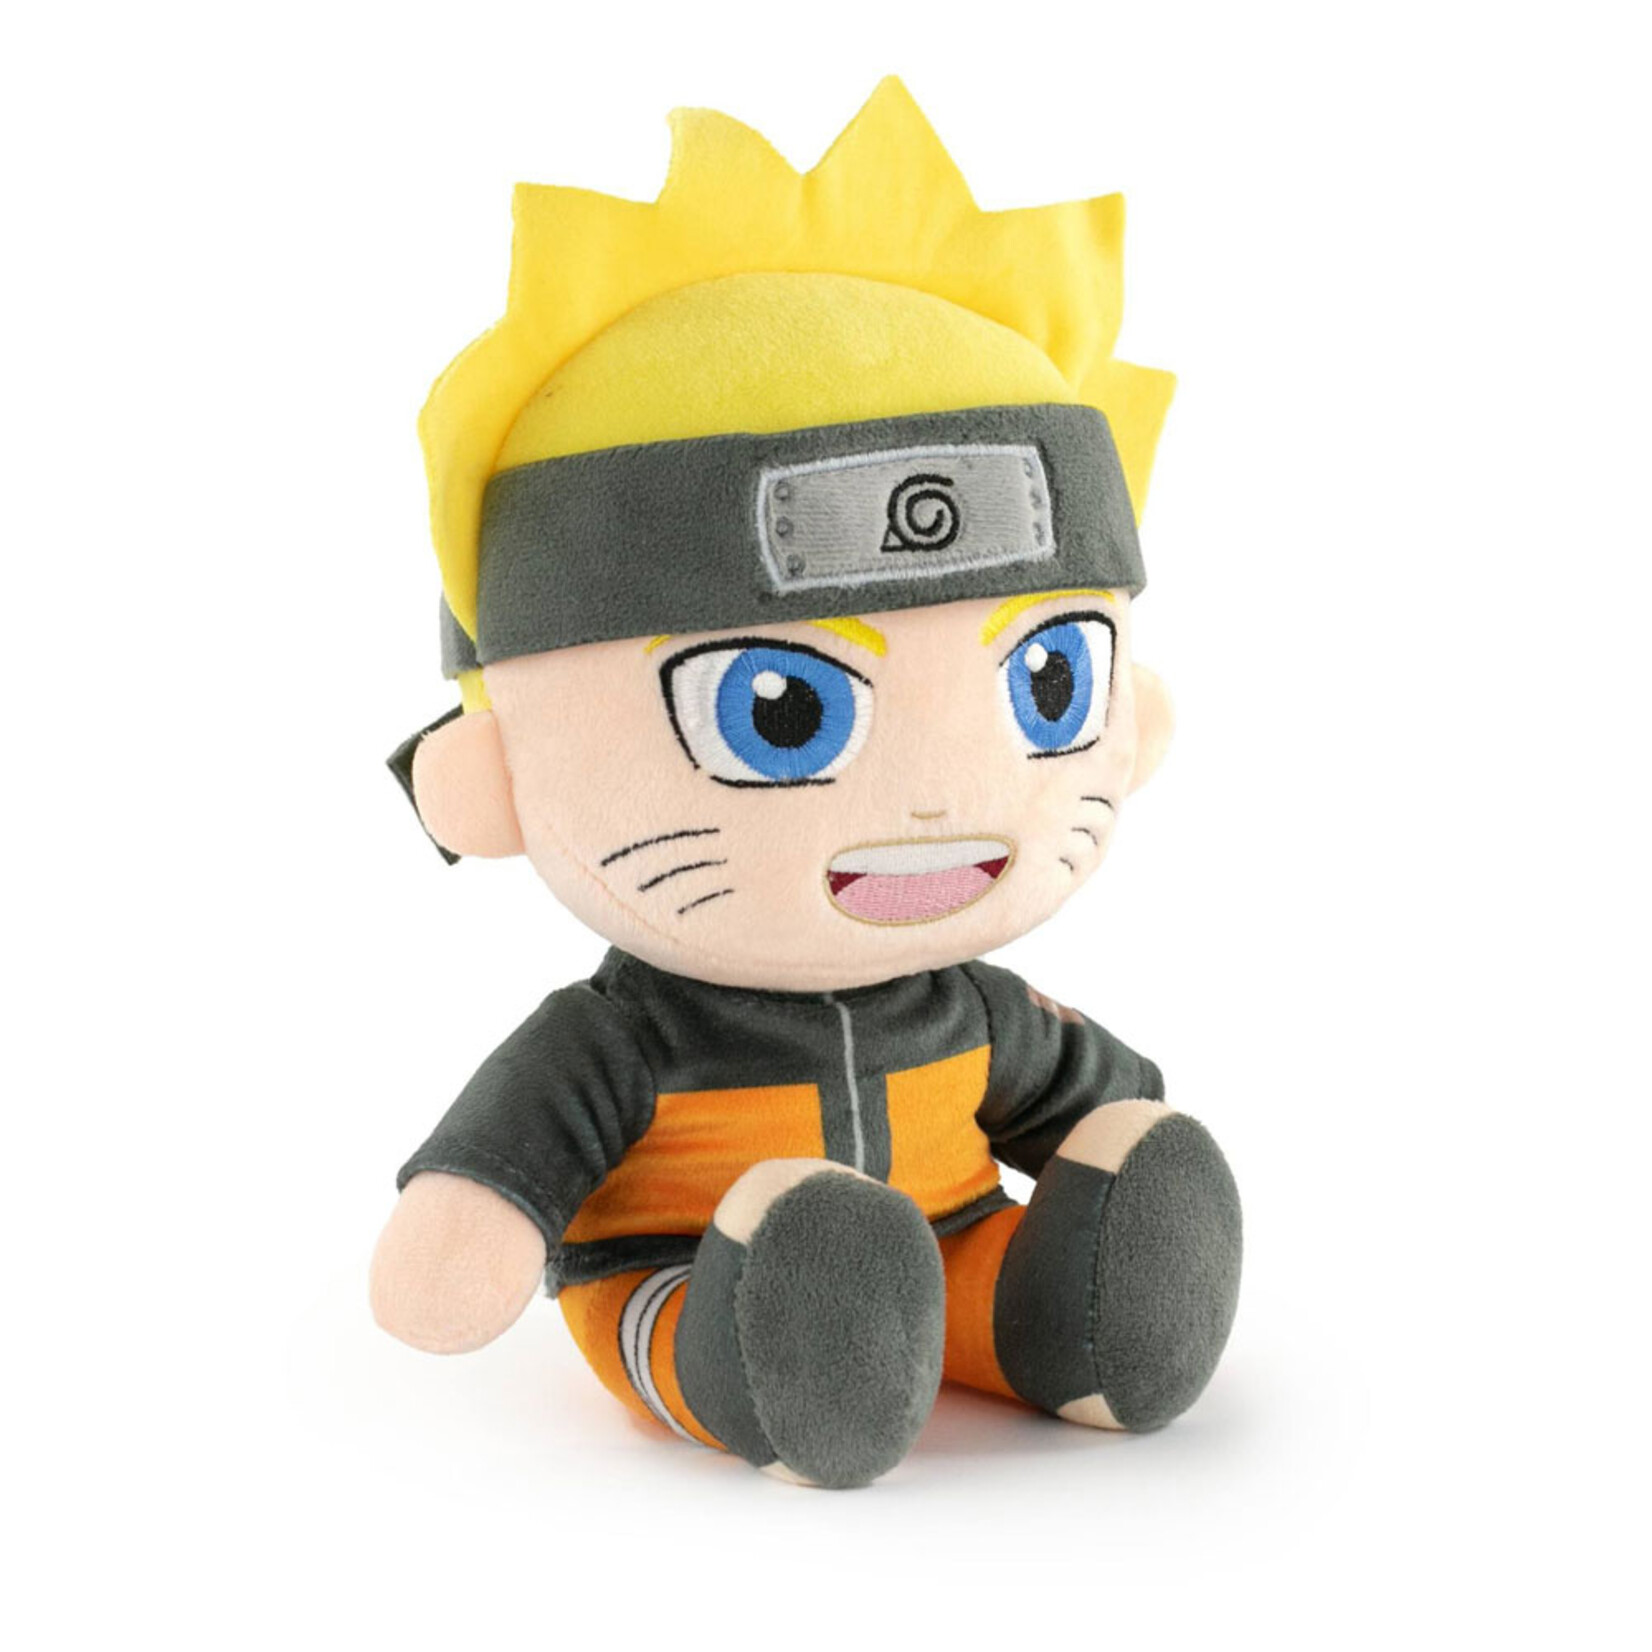 Play by Play Play by Play Naruto Shippuden Naruto Sitting Plush Toy 25 cm